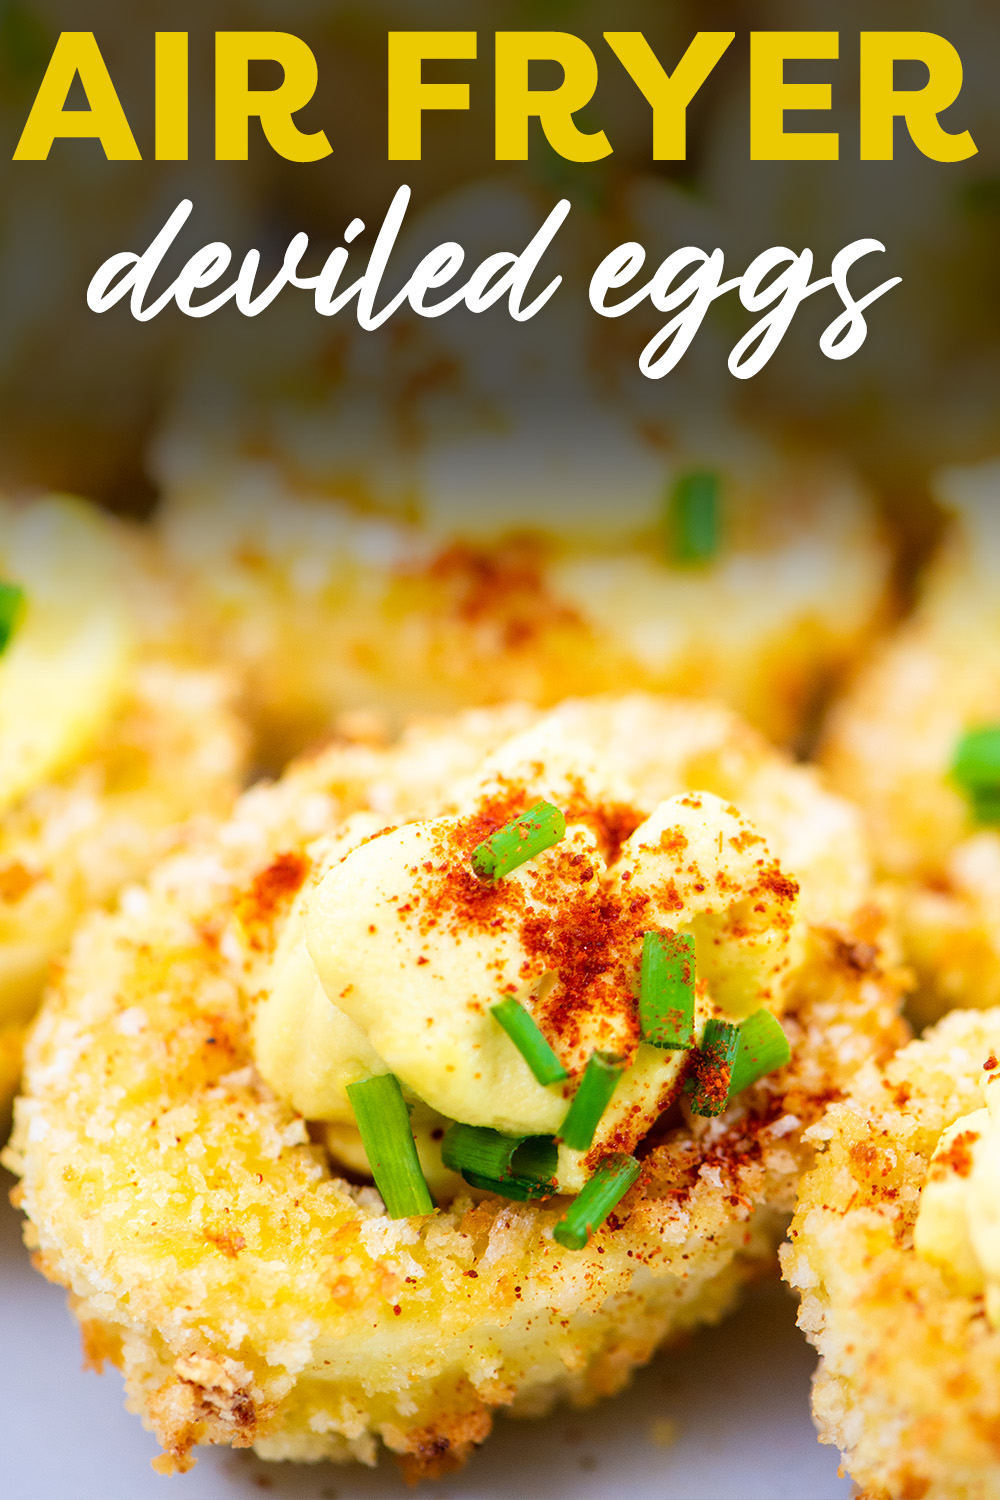 Close up of an air fried deviled egg.